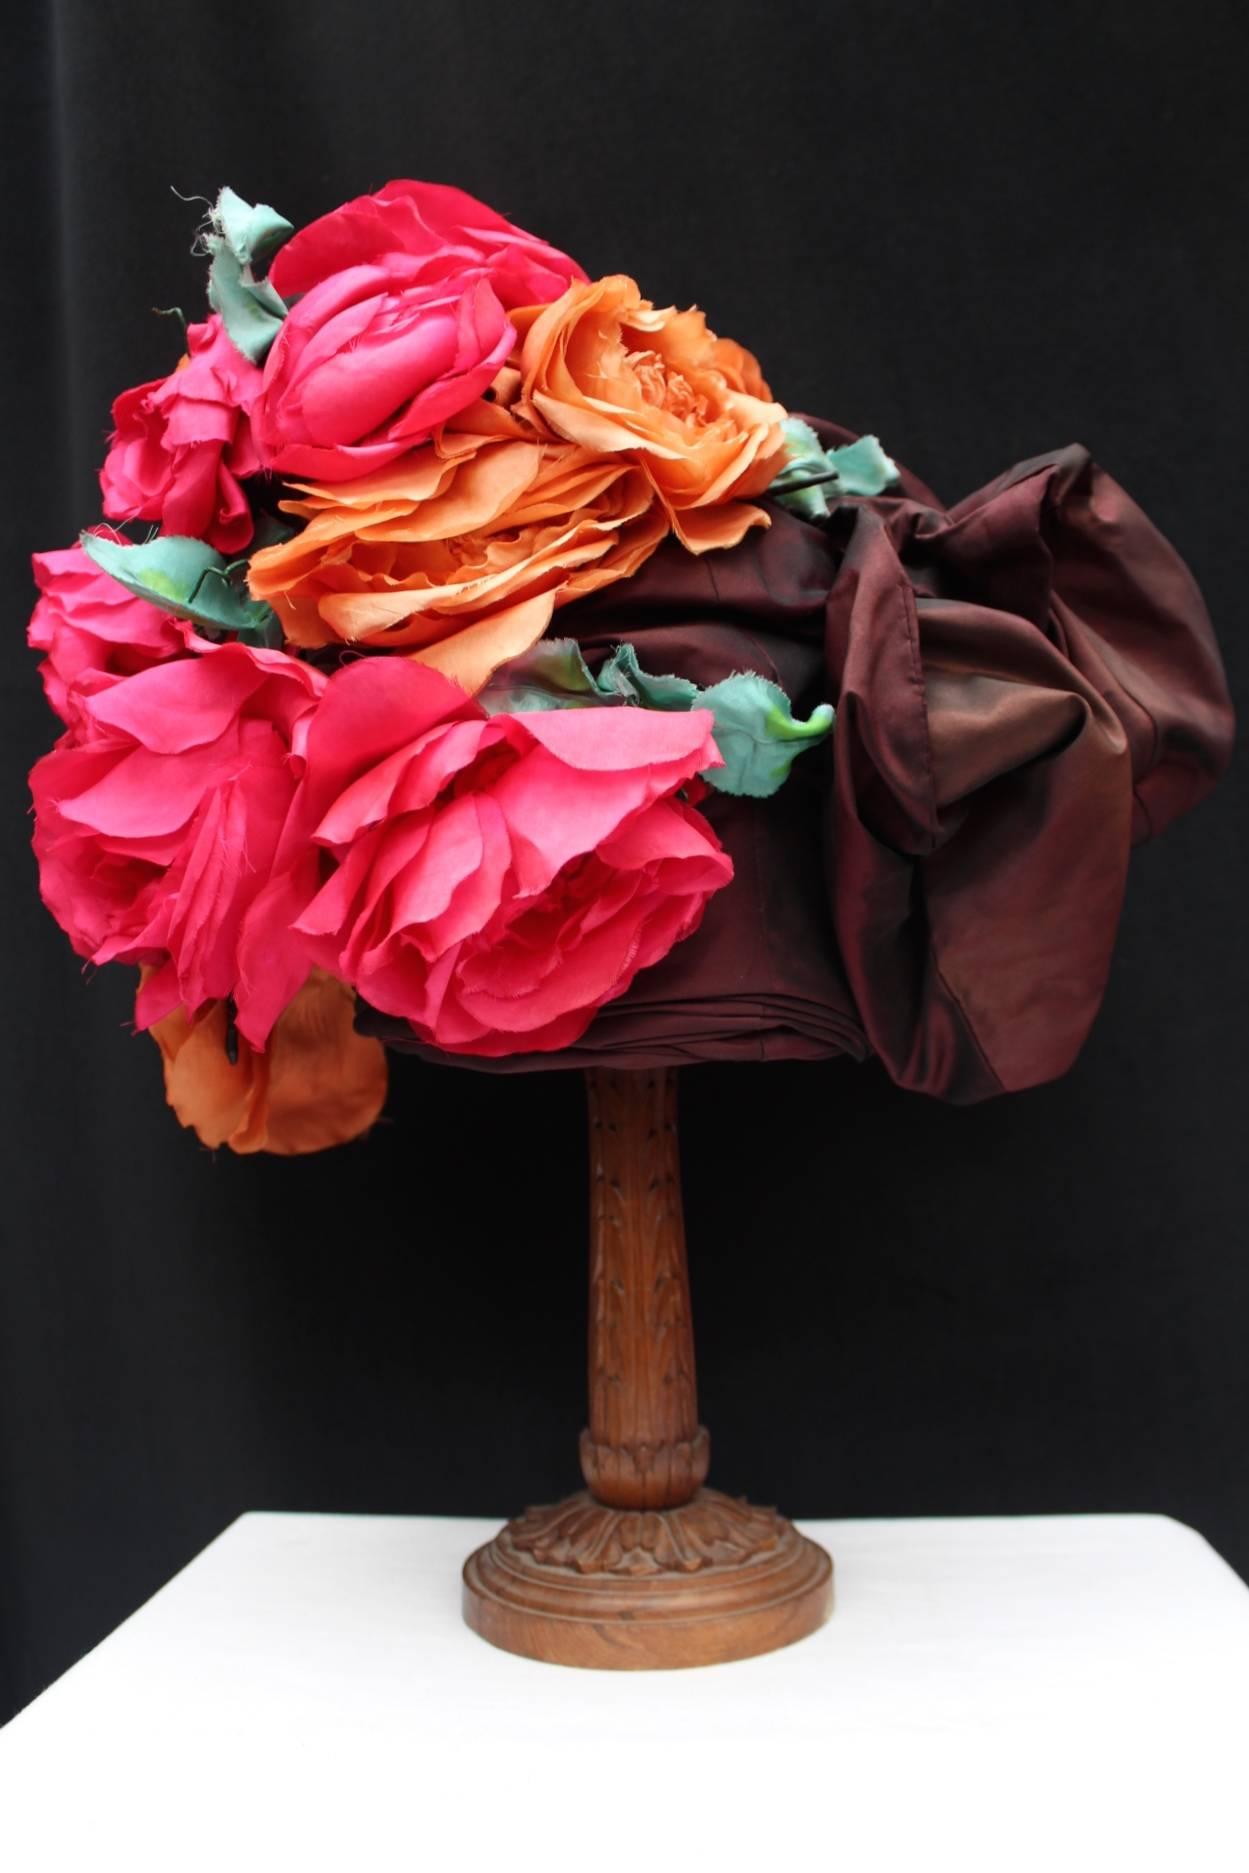 JEAN PATOU Haute Couture ( Made in France) – Magnificient hat Haute couture from the runway  in drapped silk taffetas comprised of burgundy voluminous bows and pink, orange and green flowers and leaves. 

The hat  comes with the name tag of the